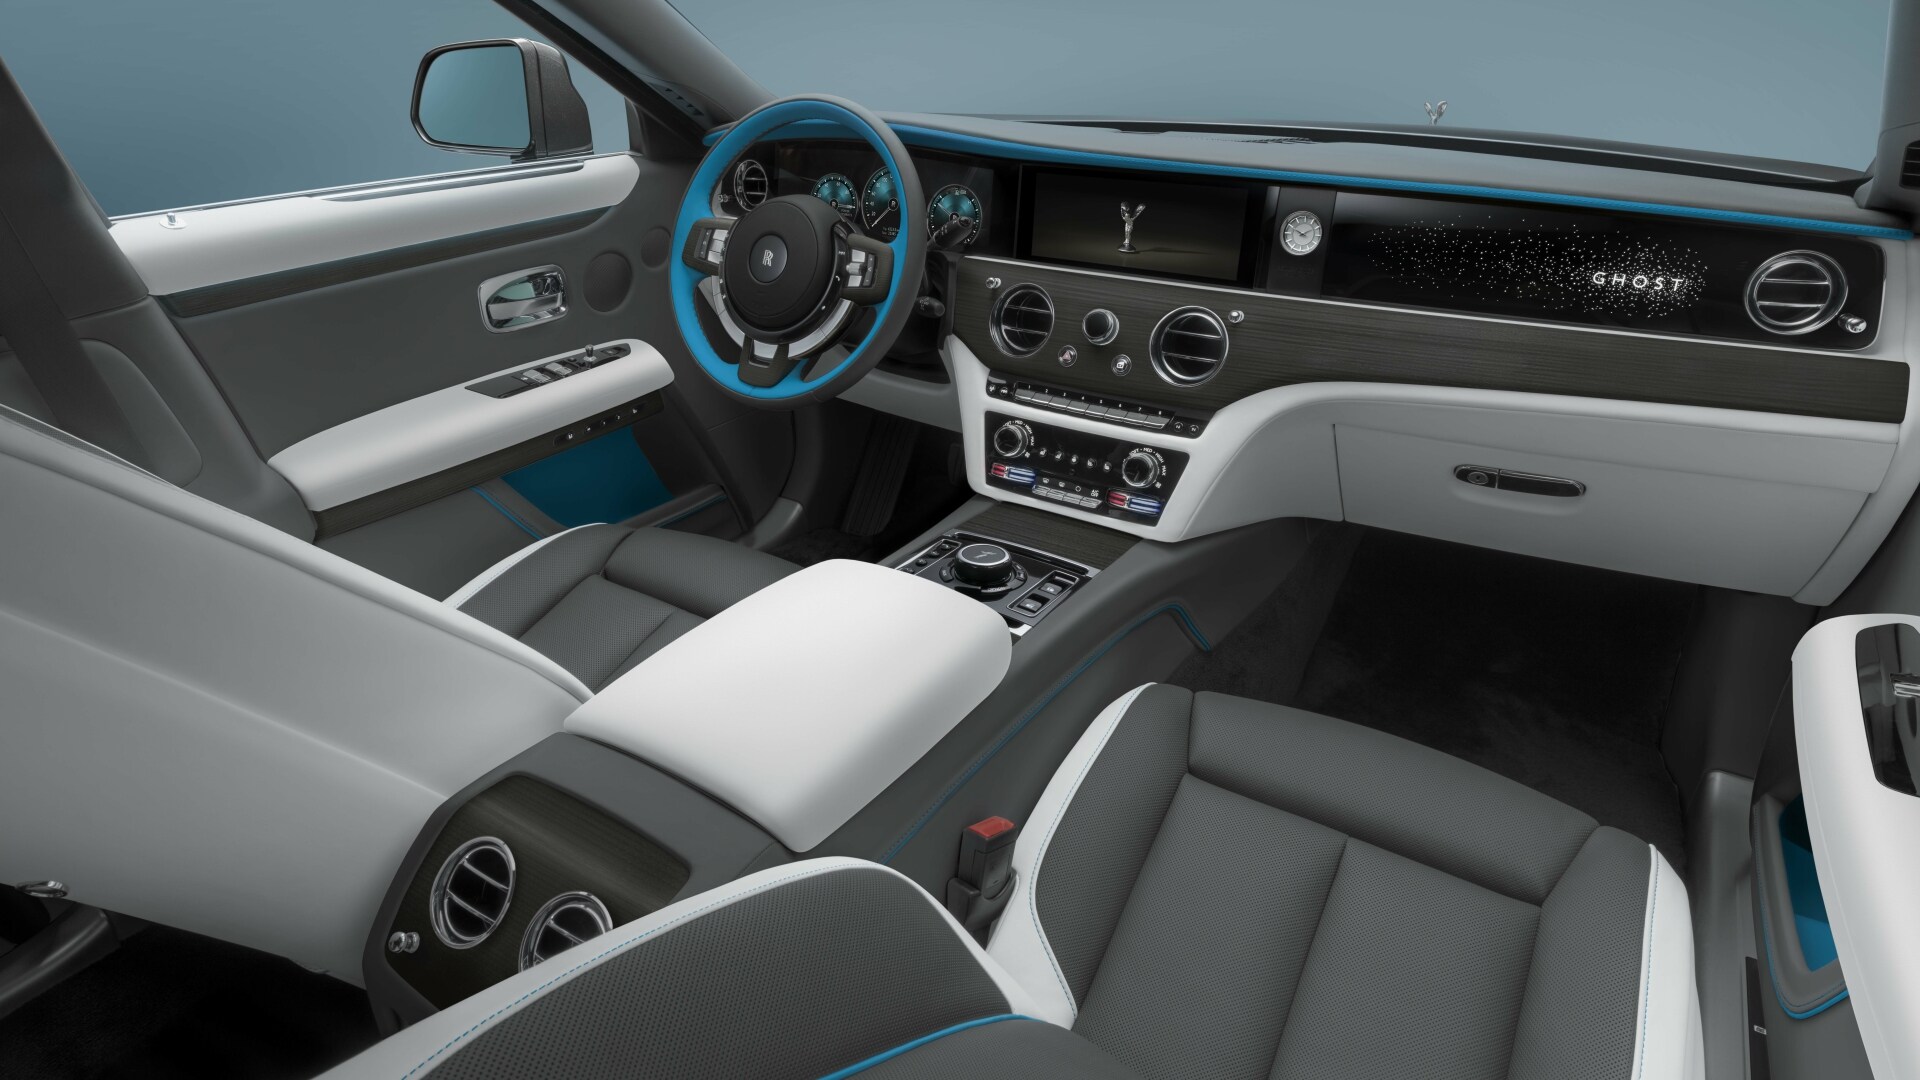 The Interior Of The Rolls-Royce 120th Anniversary Ghost Prism Edition (Credits Rolls-Royce)